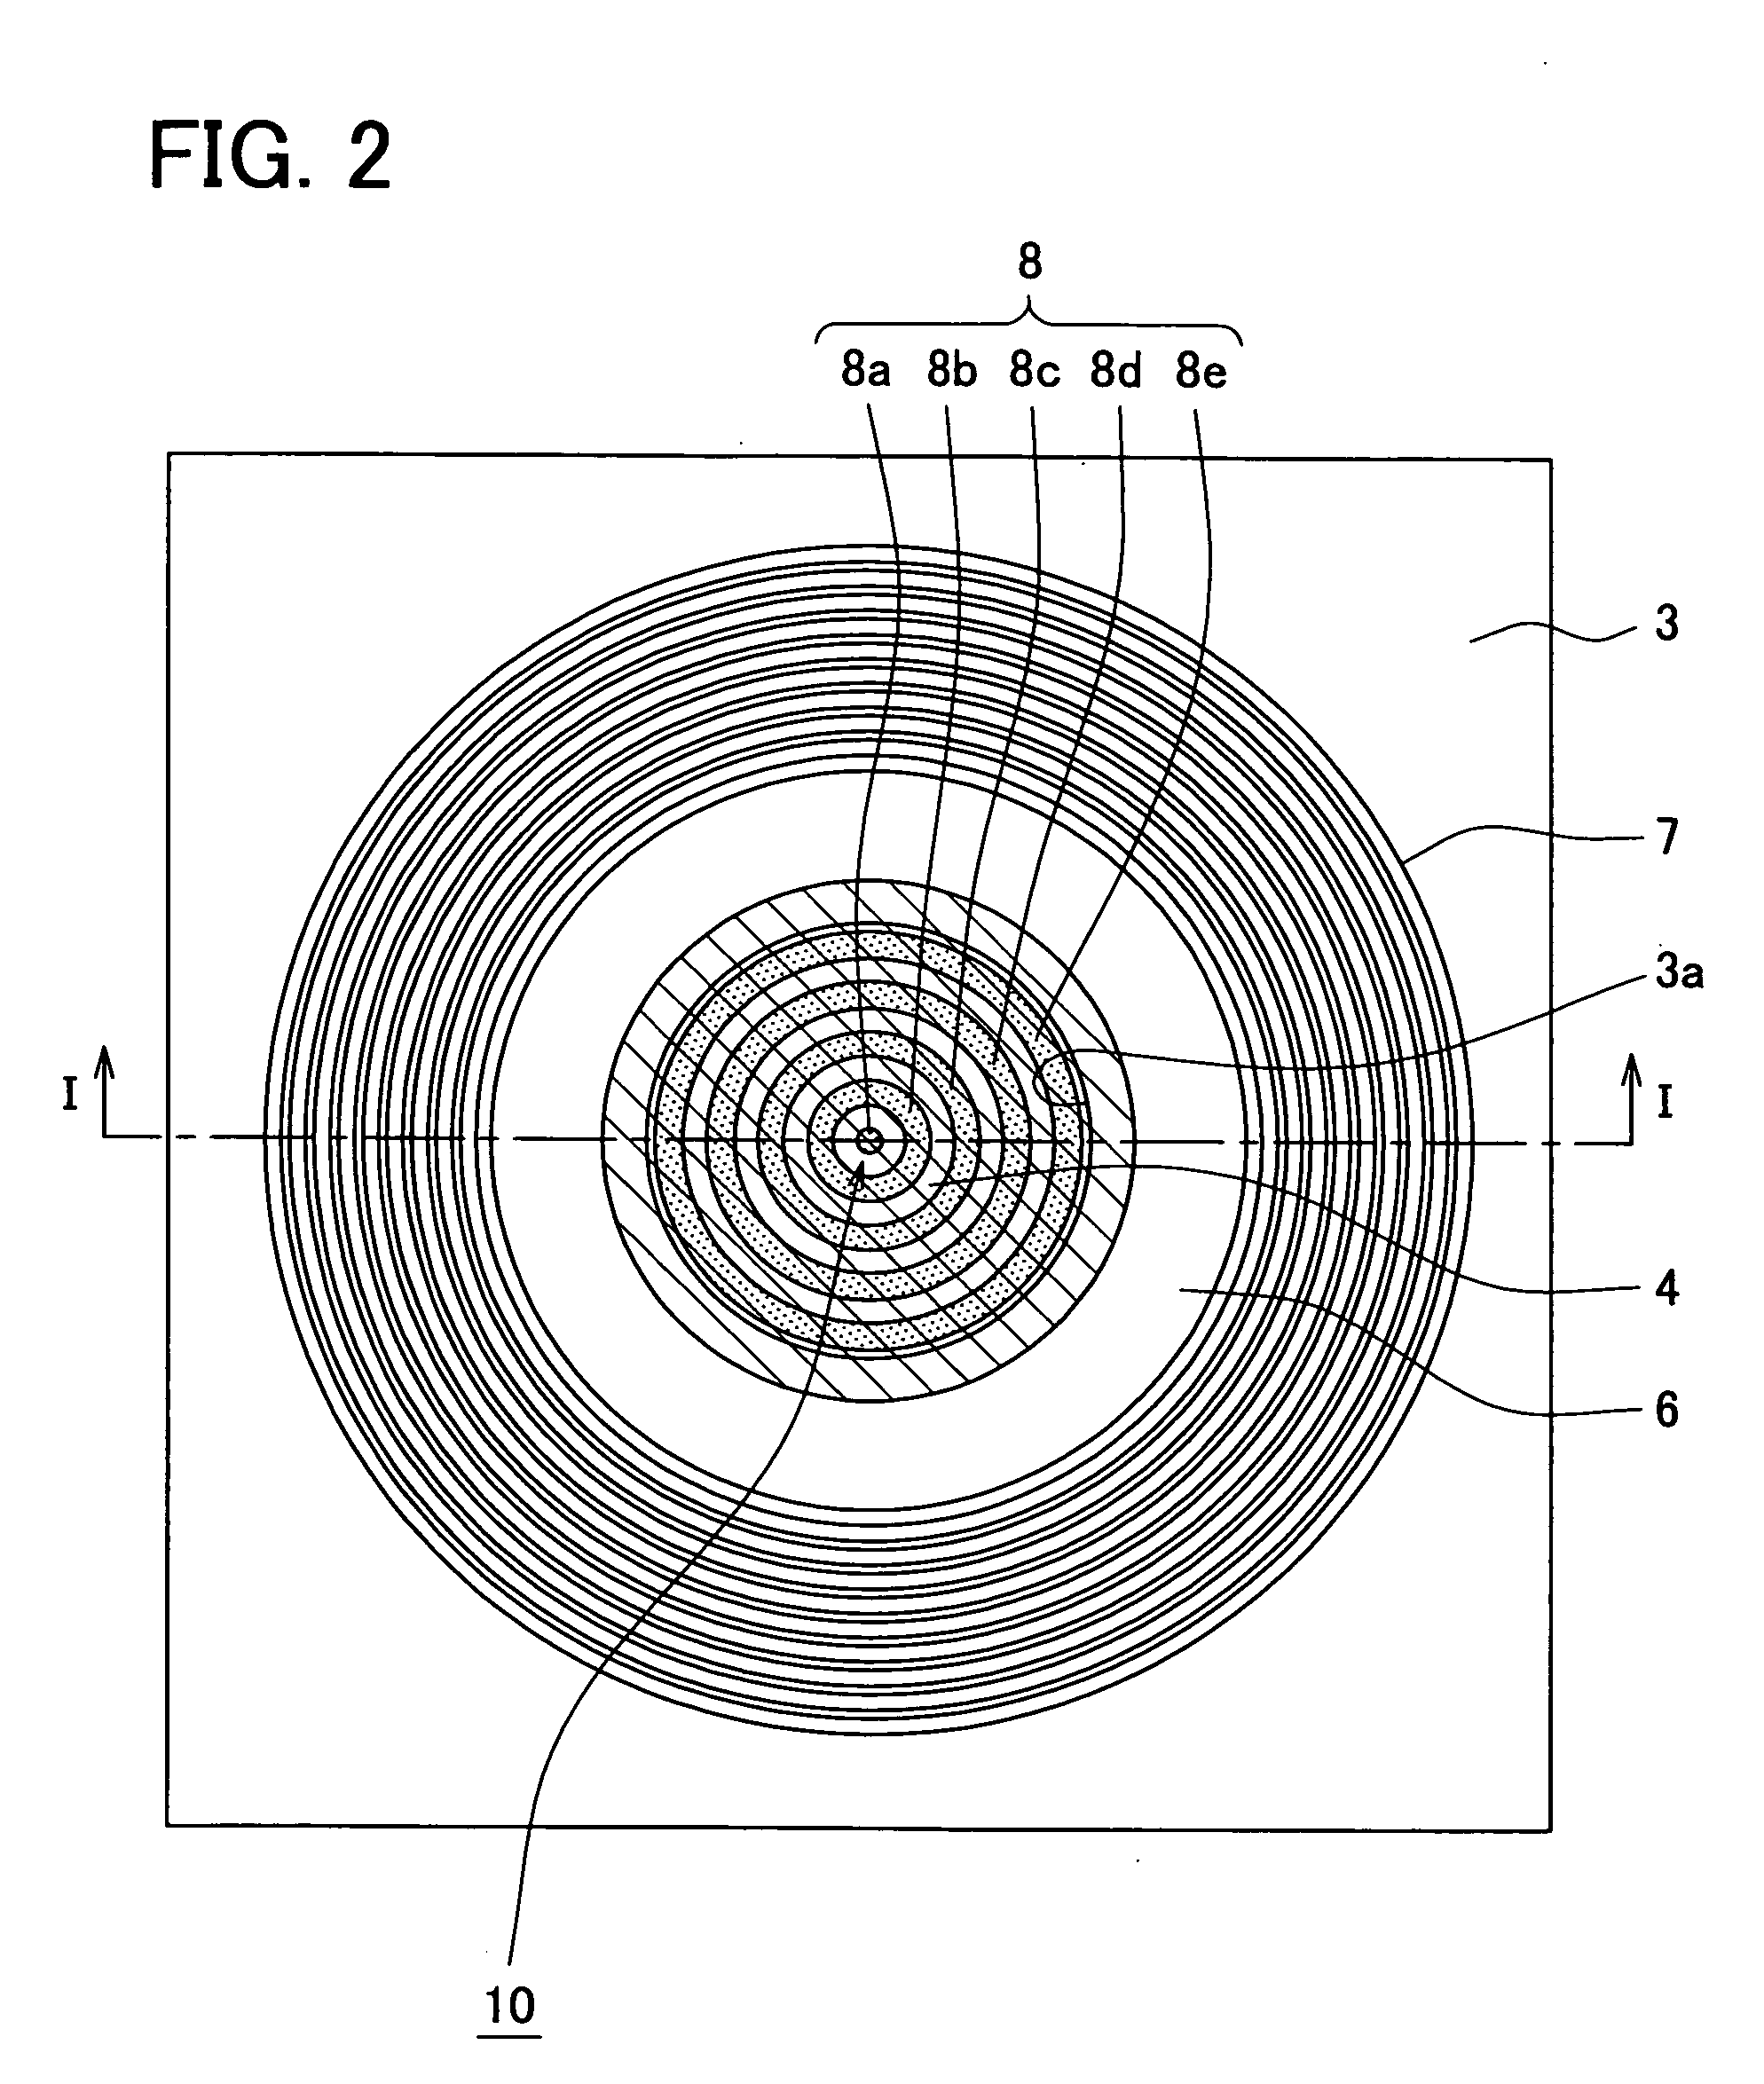 SIS semiconductor having junction barrier schottky device